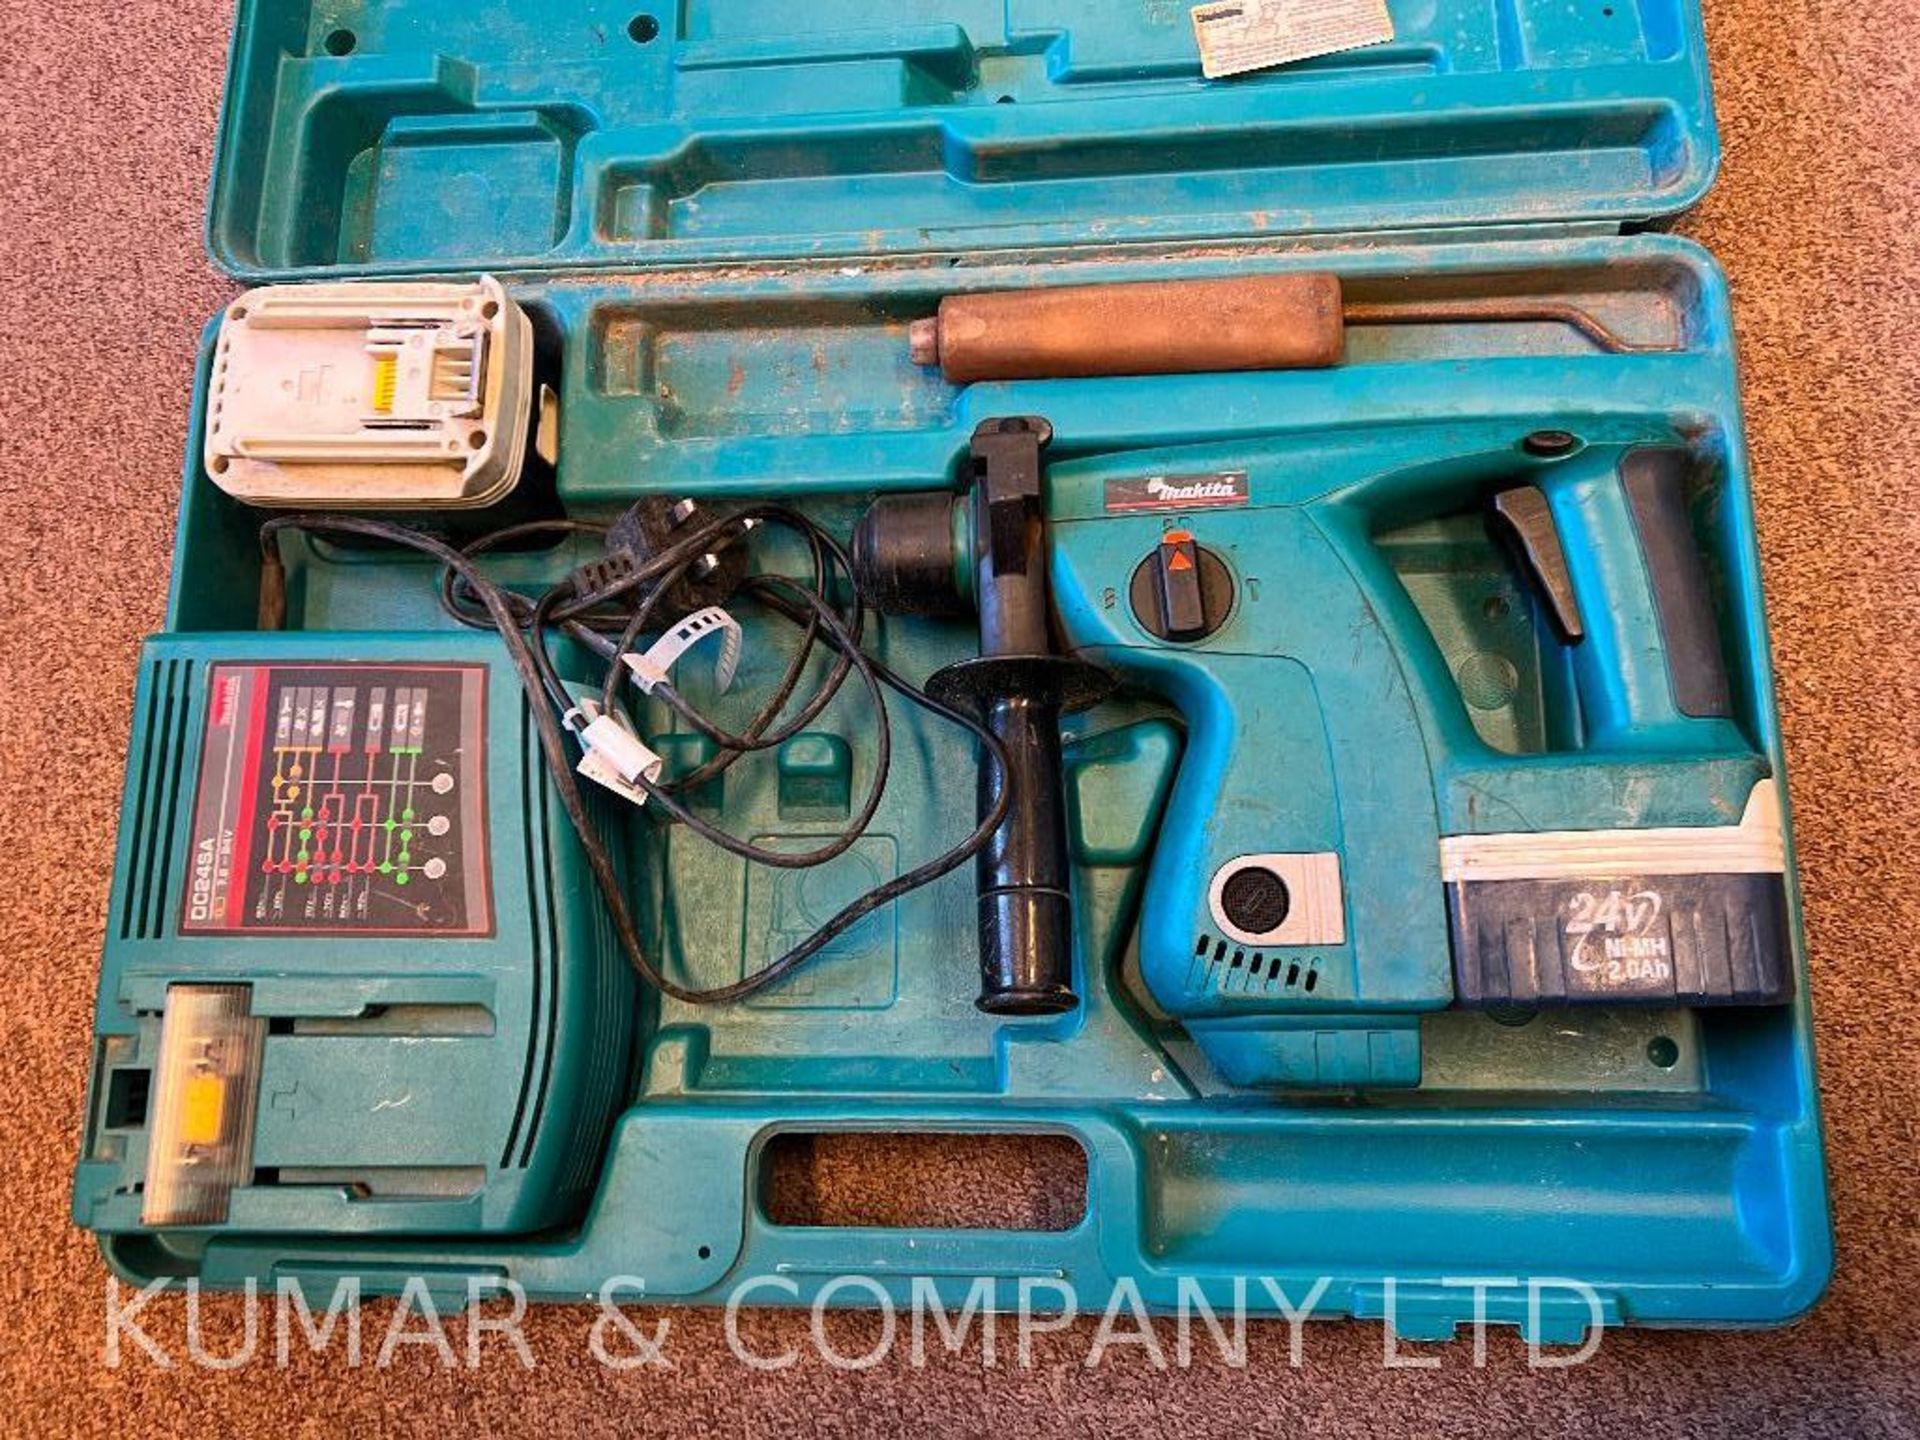 Makita BHR200 230v SDS Rotary Hammer Drill with Various Accessories in Case as Shown PLEASE NOTE: TH - Image 2 of 5